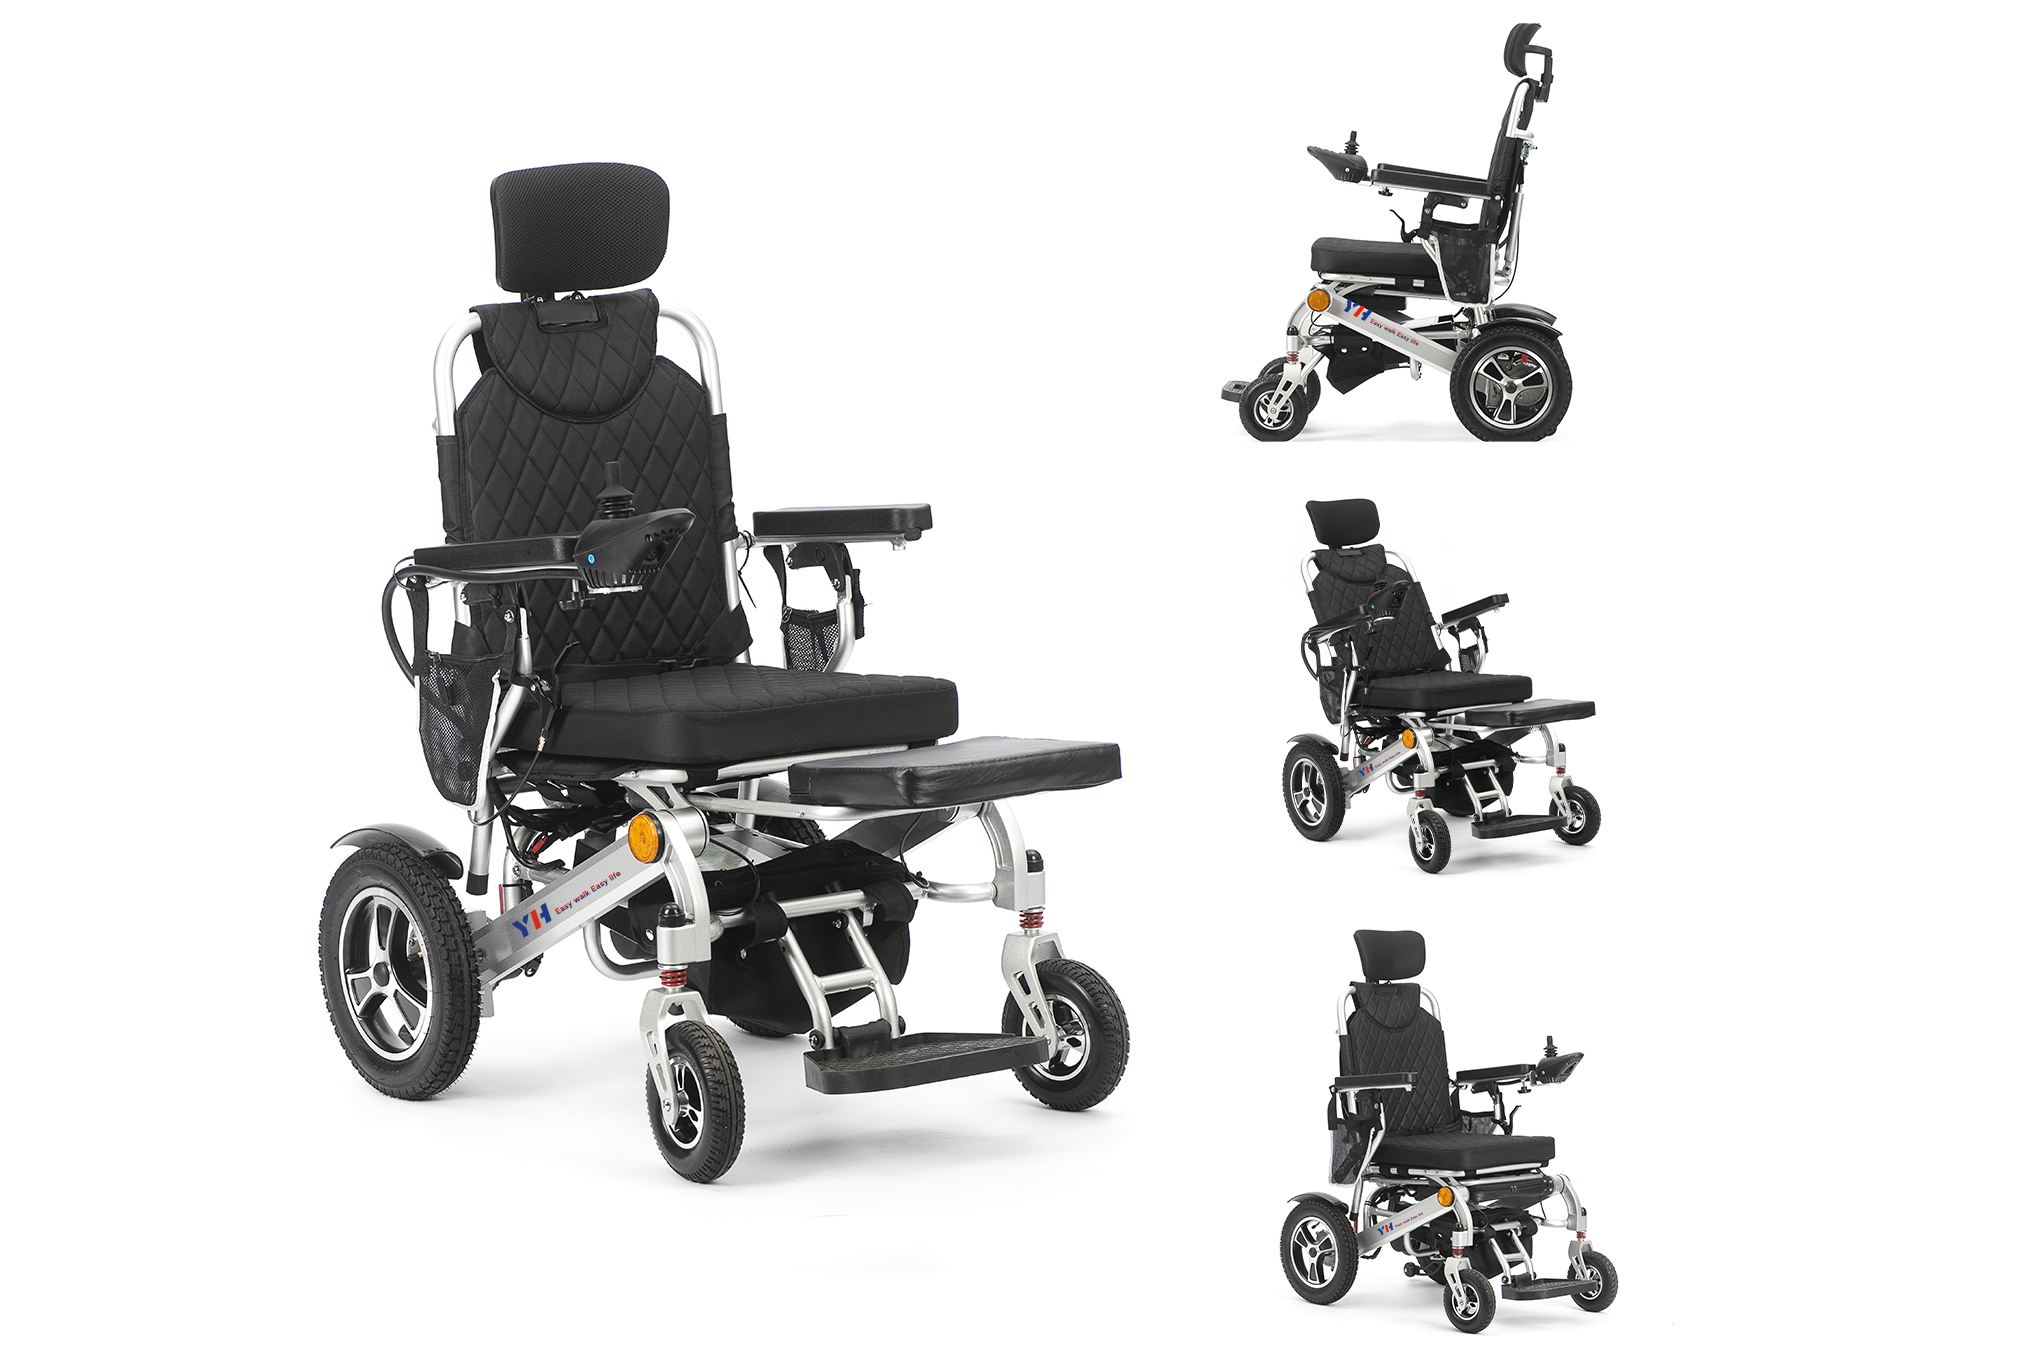 Why Choose Us: Best Electric Lightweight Foldable Electric Wheelchair-Enhance your mobility with the ultimate reclining electric wheelchair